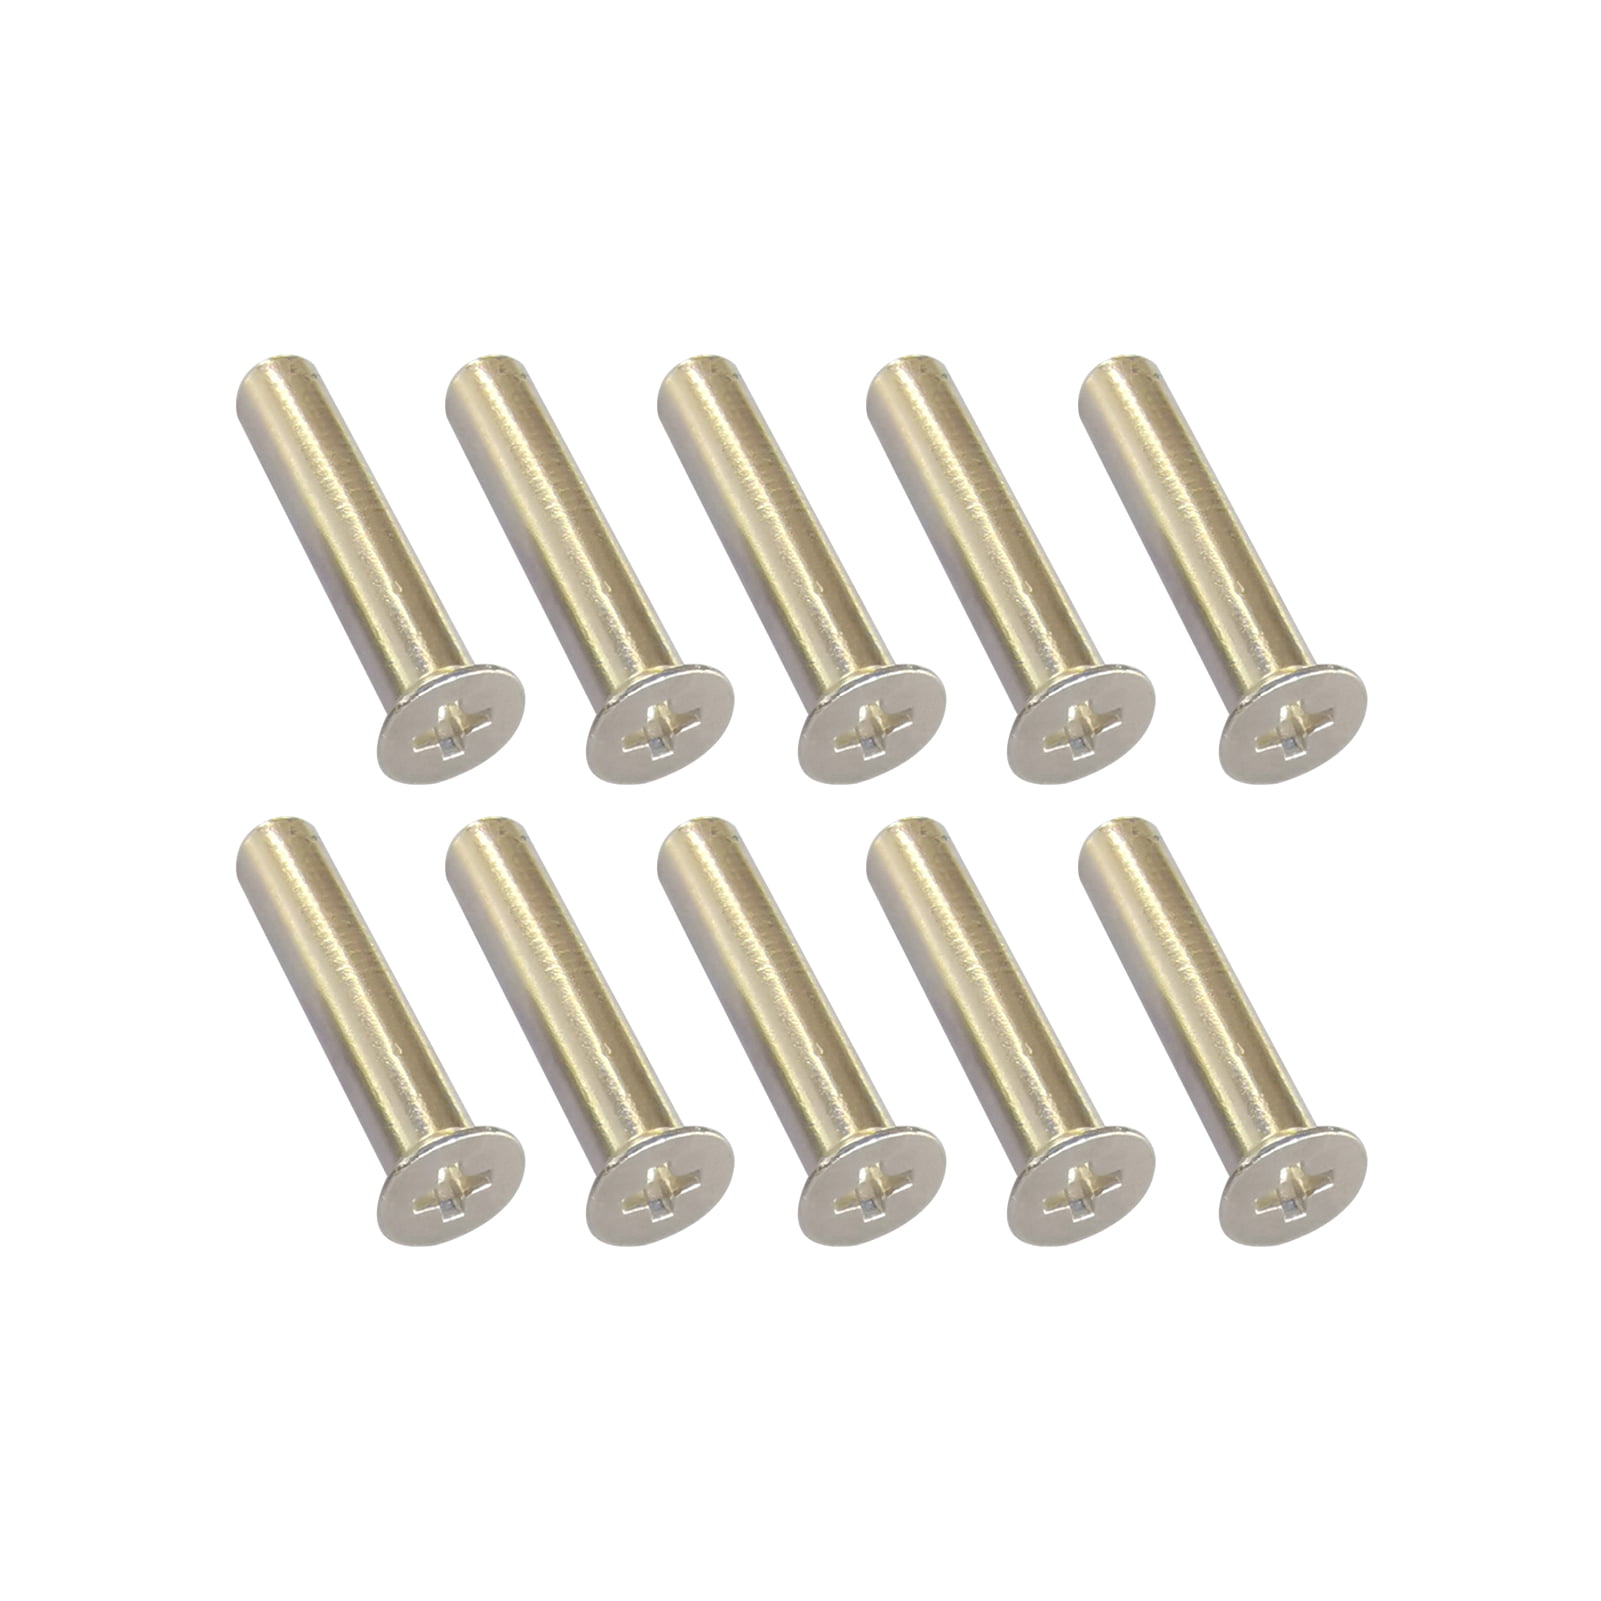 ALUMINUM ALLOY GOLDEN COLOR M5 5mm COUNTERSUNK HEAD WASHERS BOLT SCREW CUP 